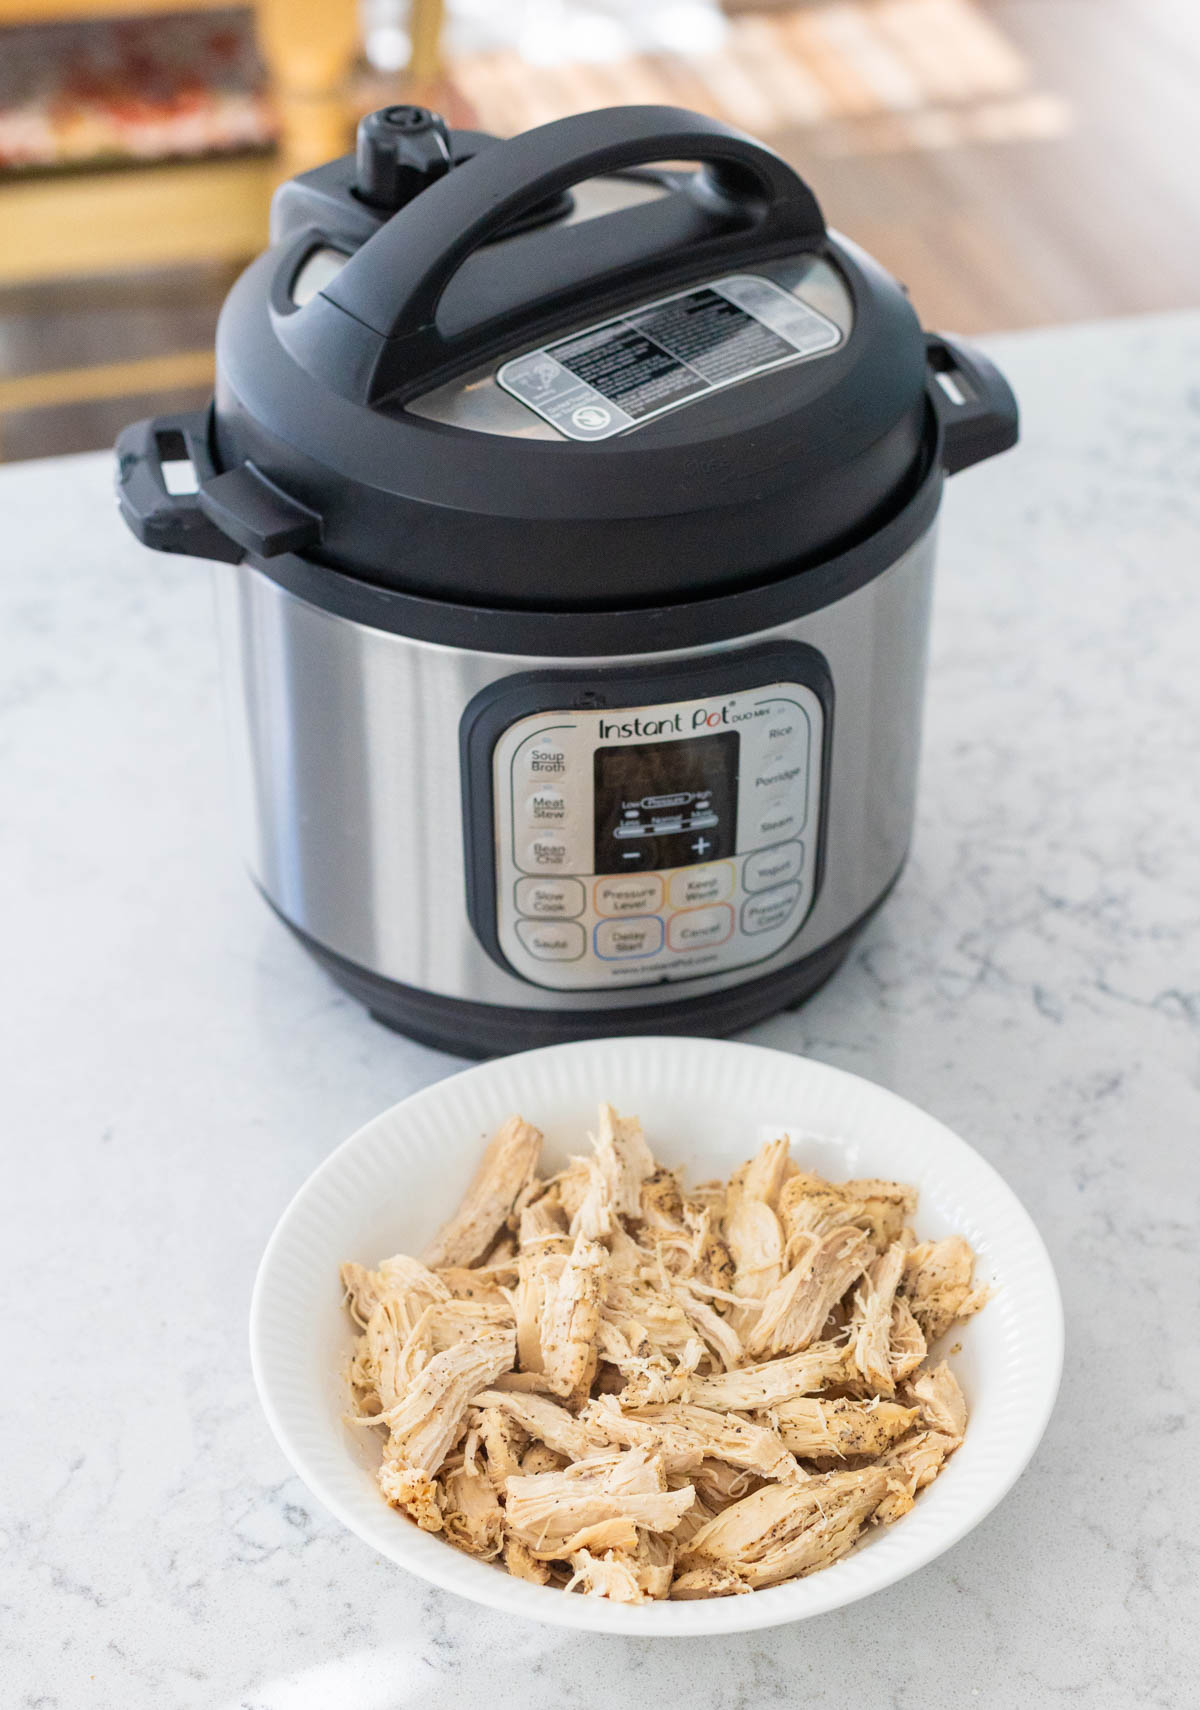 The bowl of shredded chicken is in front of the Instant Pot.